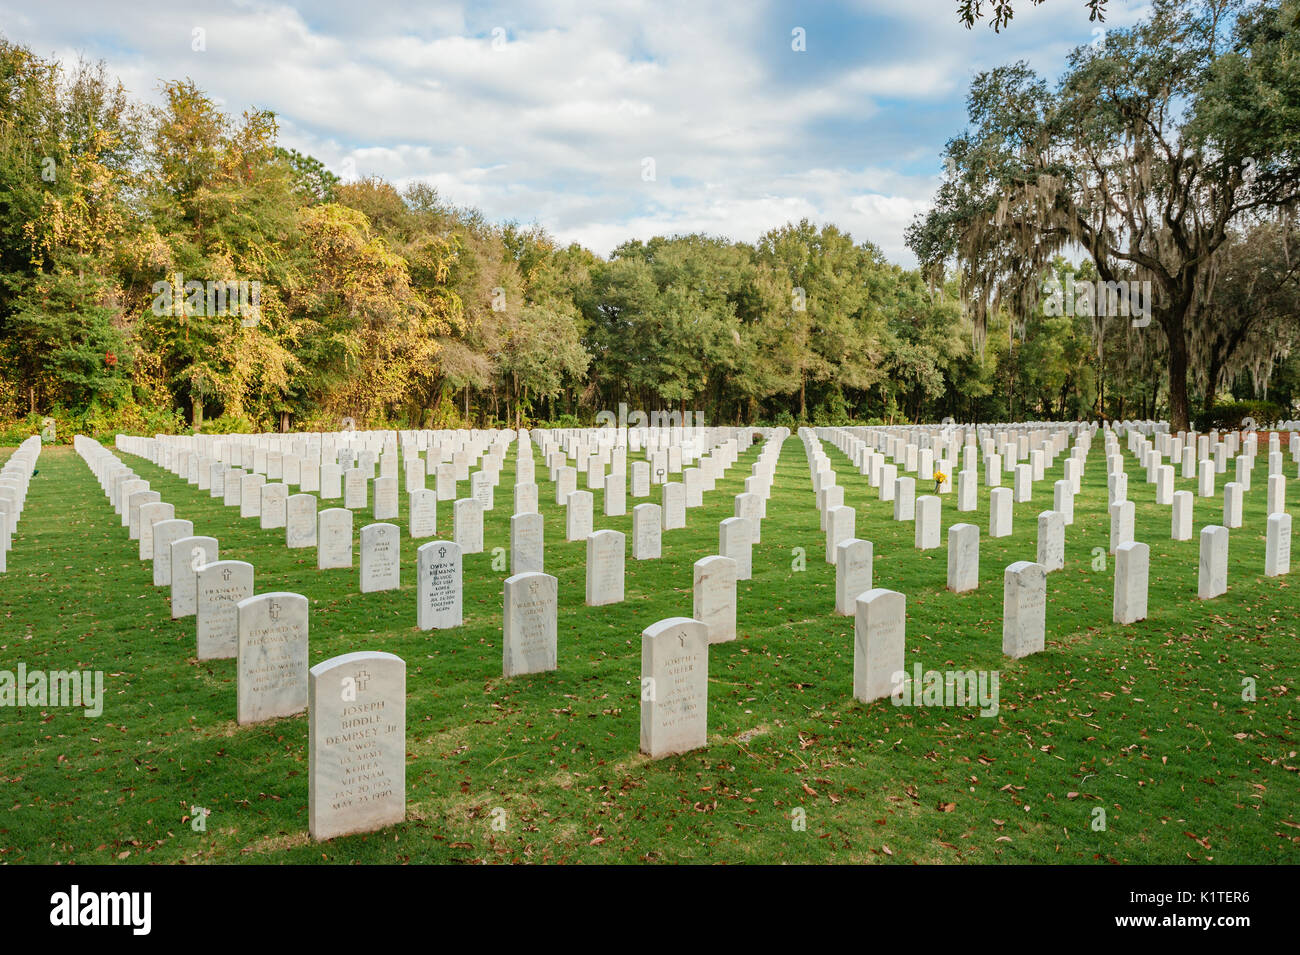 The National Cemetery at Bushnell Florida, where U.S. military veterans